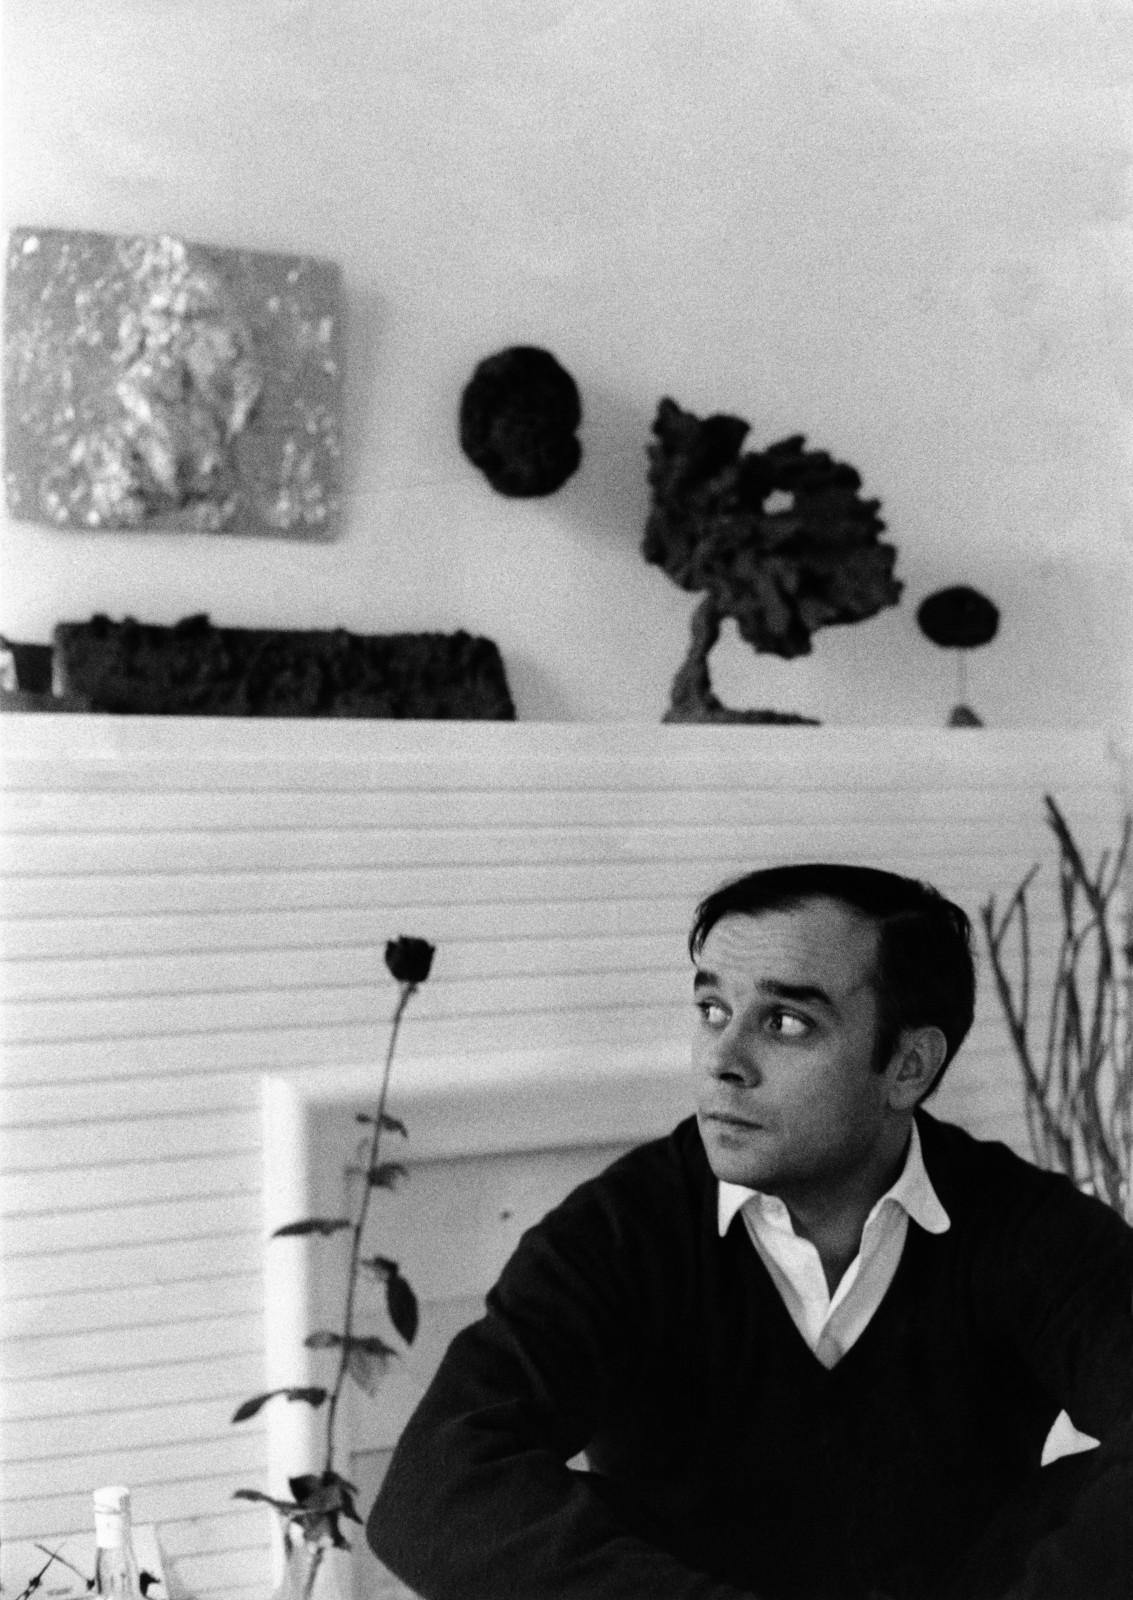 Yves Klein in his studio surrounded by his works (MG 5, RE 7, SE 33, SE 72)